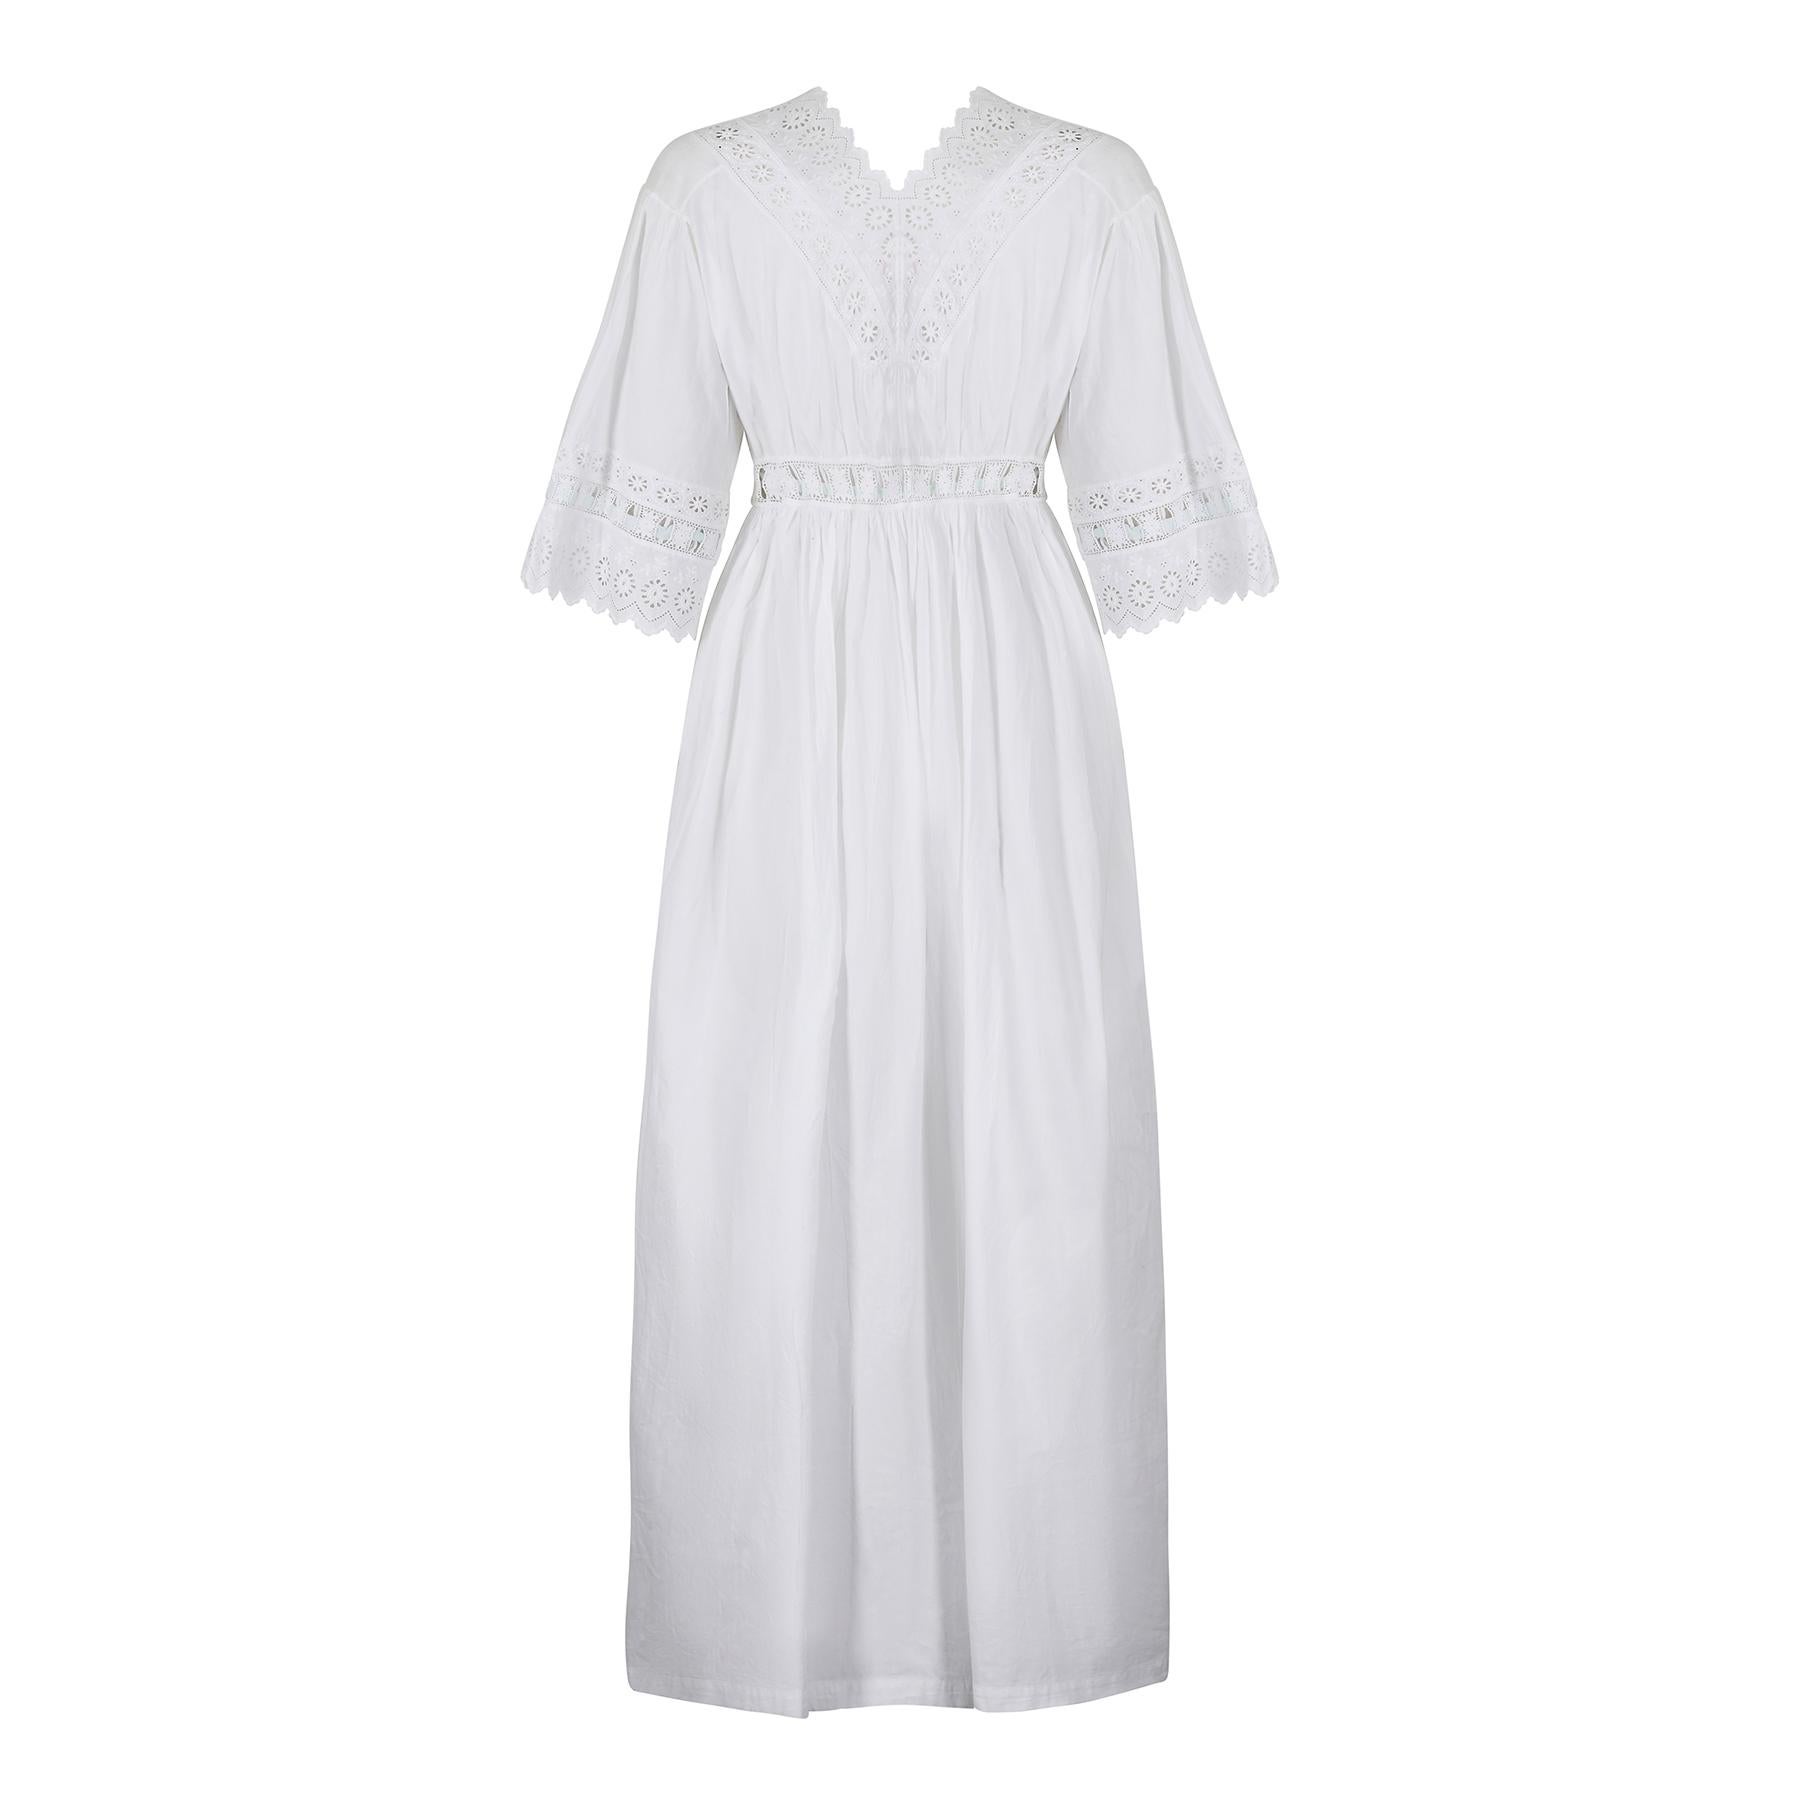 This antique 1920s whitework and ribbon dress is a really beautiful and fresh example of night wear from the era or even a bit earlier. It looks so modern and could easily be worn as day wear. The bodice is of particular note - made with machined